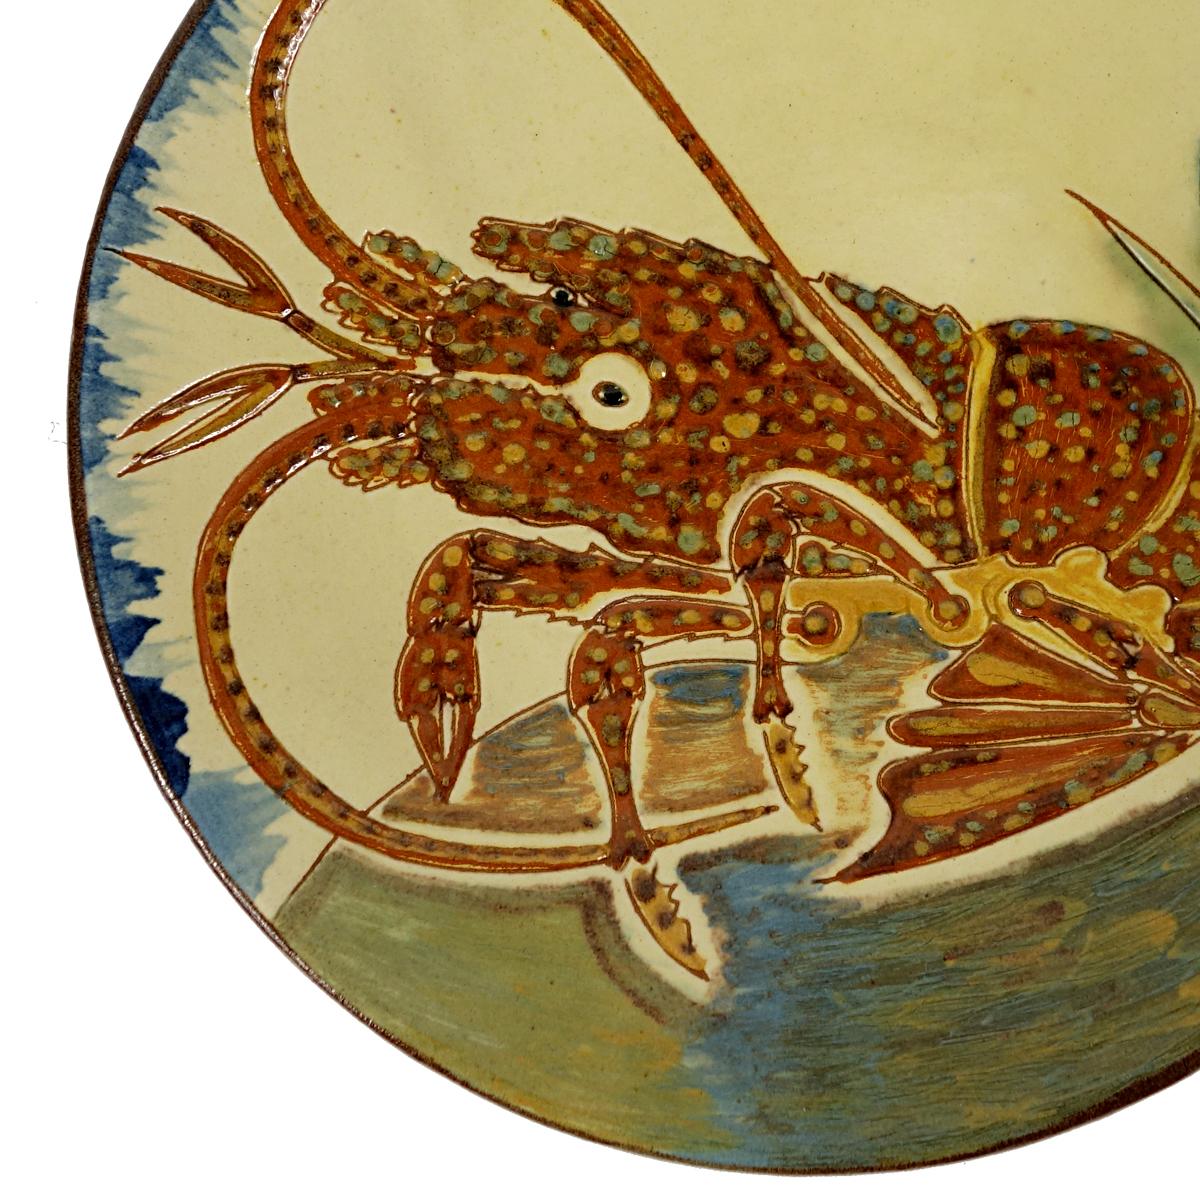 20th Century Ceramic Wall Plate with Lobster Decor Signed by Spanish Maker Puigdemont